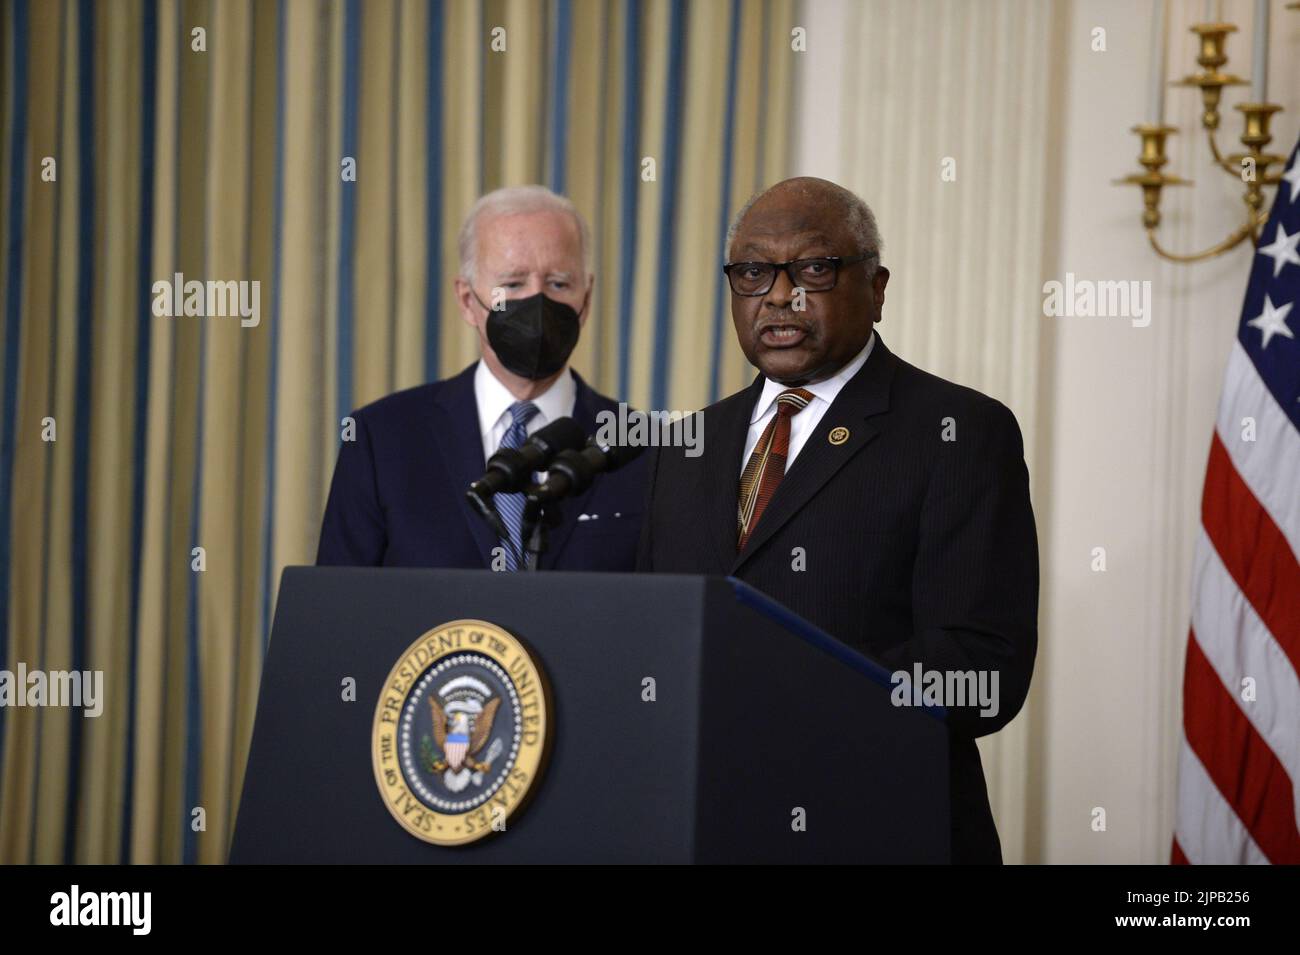 Washington, United States. 16th Aug, 2022. House Majority Whip Jim Clyburn, D-SC, speaks during a bill signing ceremony for the Inflation Reduction Act of 2022, a $737 billion act focused on slowing climate change, lowering health care costs and creating more clean energy jobs, in the State Dining Room at the White House in Washington, DC on Tuesday, August 16, 2022. Photo by Bonnie Cash/UPI Credit: UPI/Alamy Live News Stock Photo